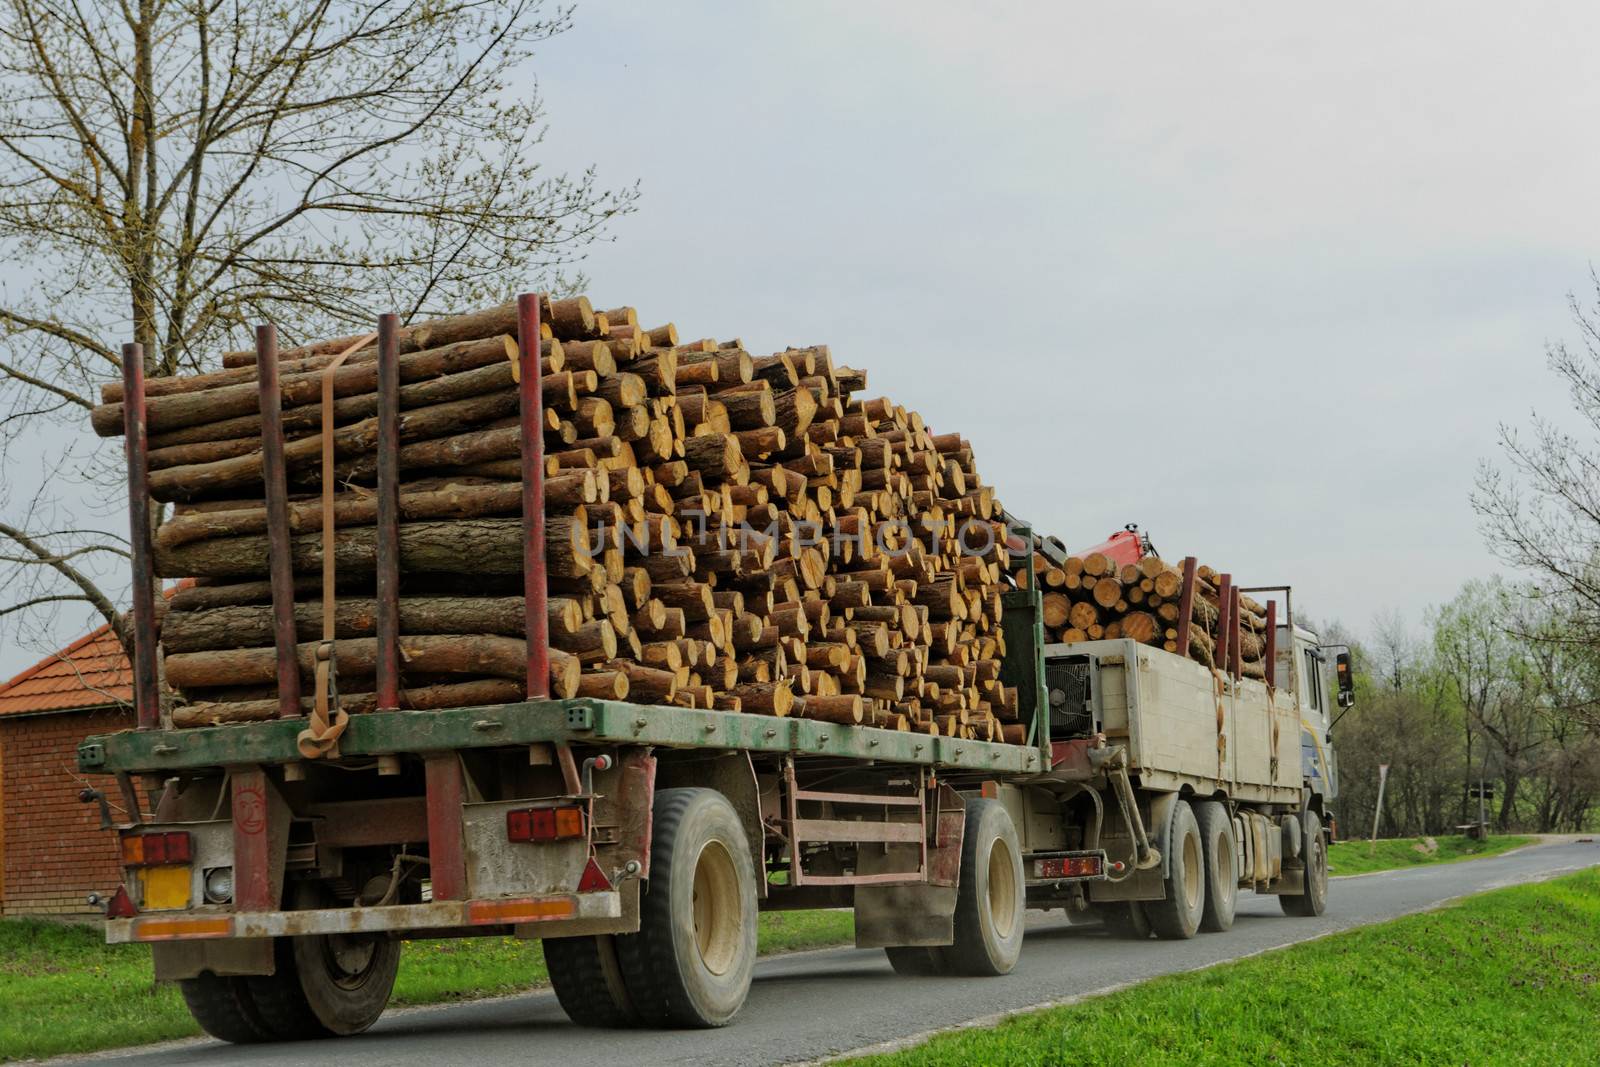 timber truck carrying